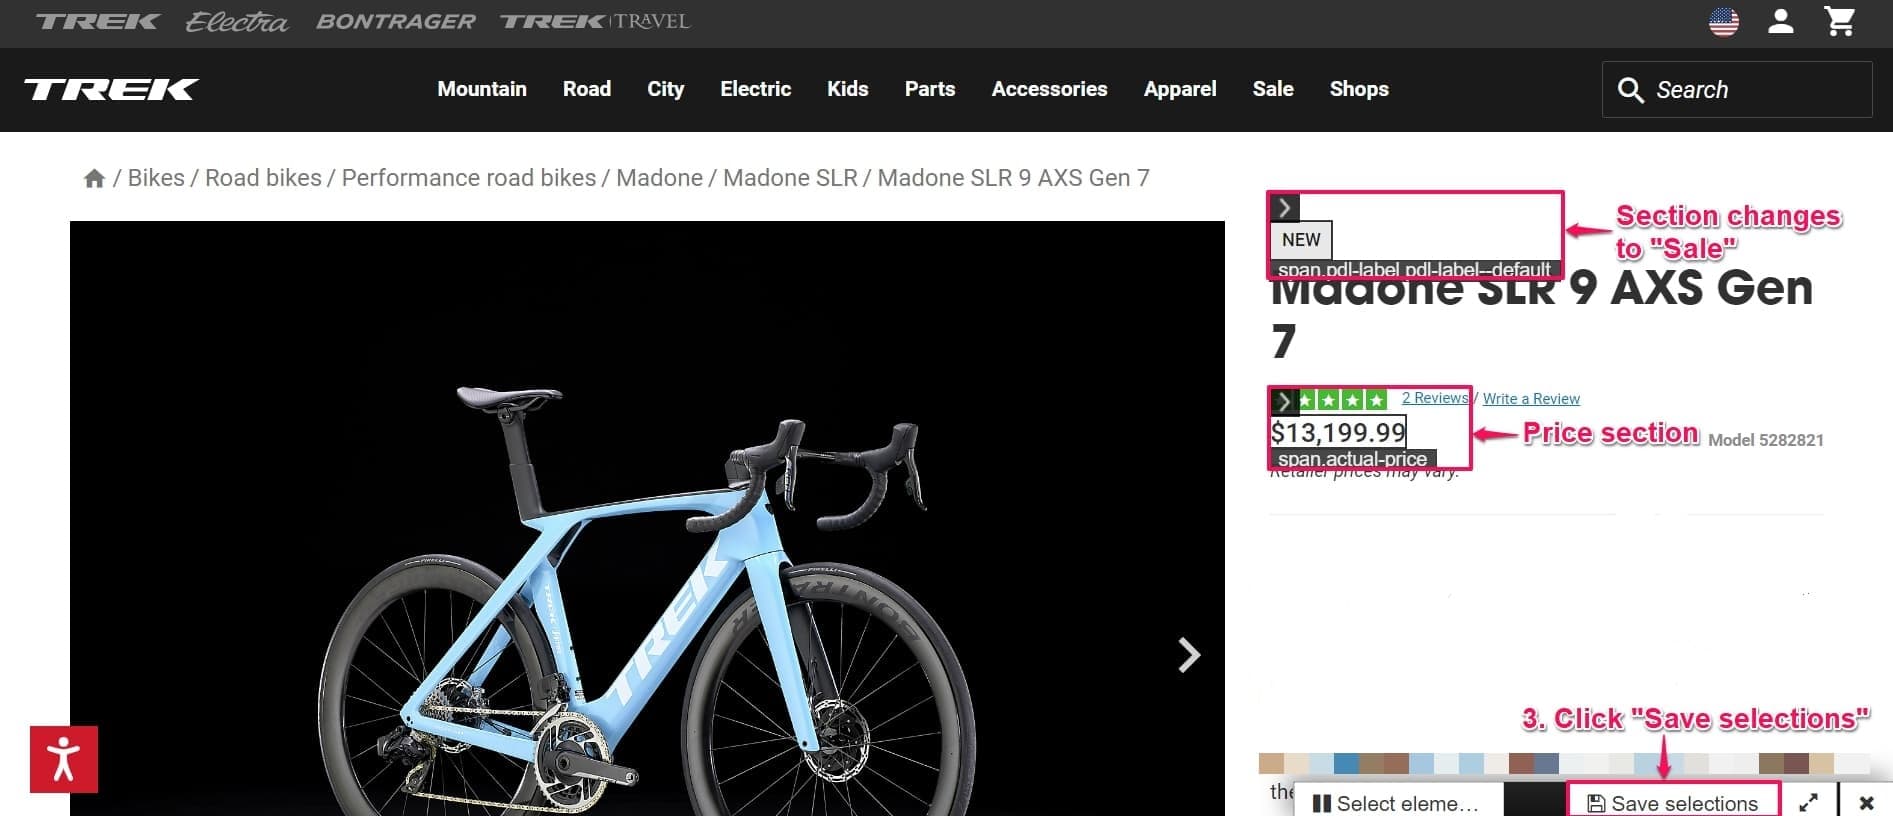 Get price drop and availability alerts for bikes on websites